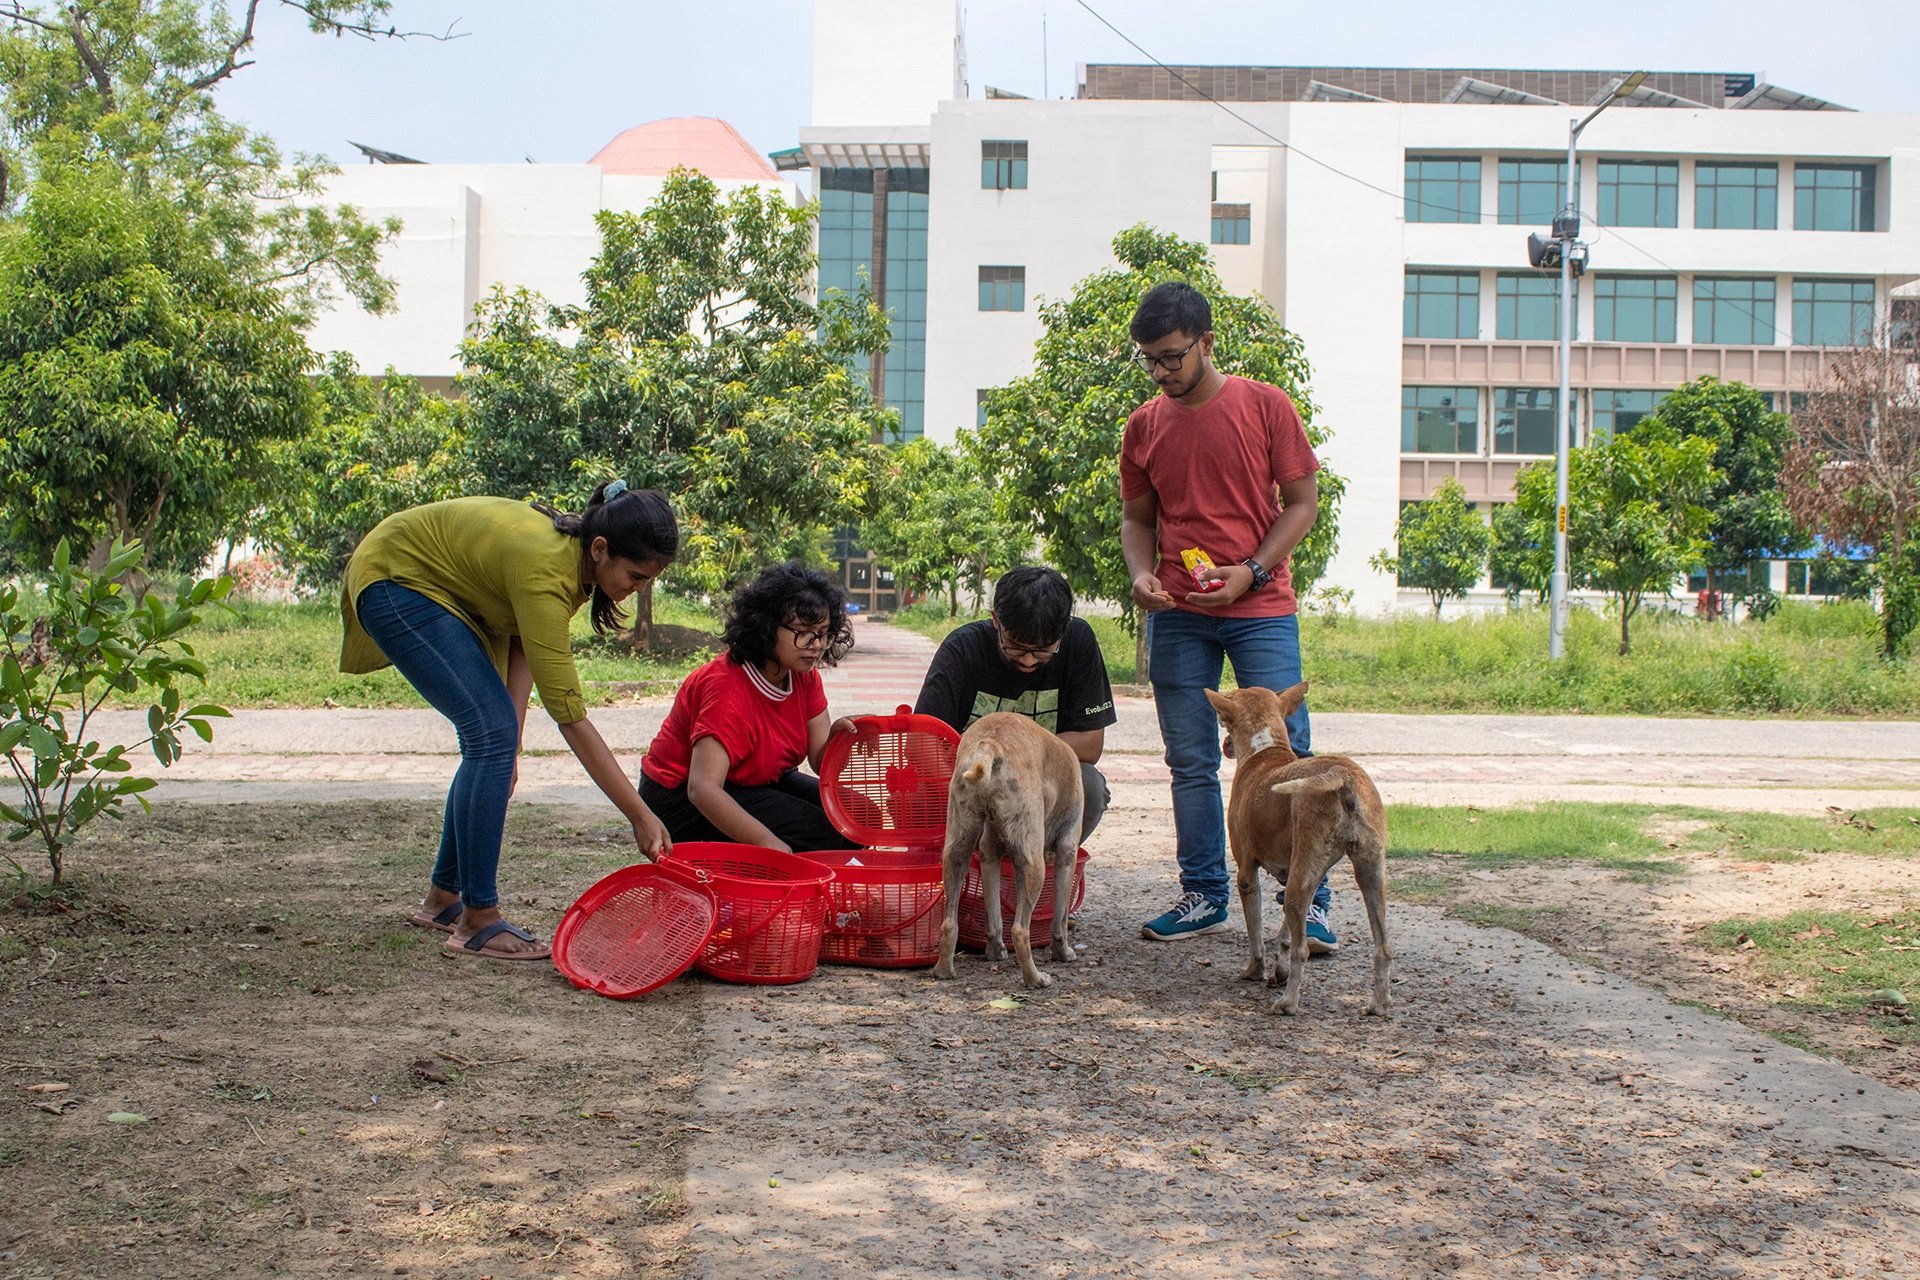 The researchers are collecting the mock dustbin boxes after finishing a set of experiments. People in the photo (from L-R): Debolina Sen, Hindolii Gope, Rohan Sarkar, Tuhin Subhra Pal. Picture credits: The Dog lab, IISER Kolkata